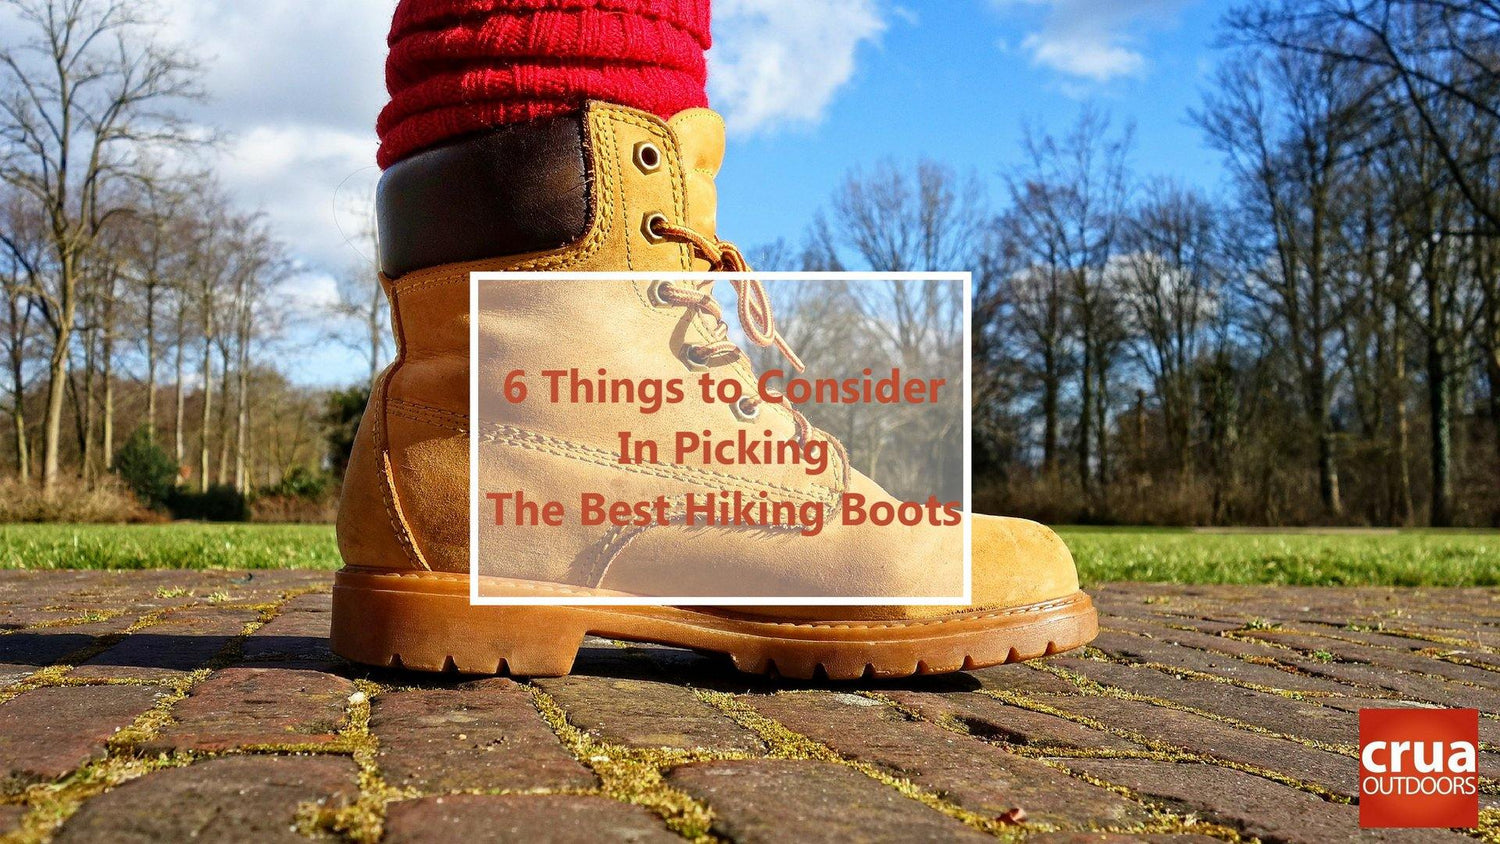 Picking the Best Hiking Boots for You - Six Things to Consider - Crua Outdoors